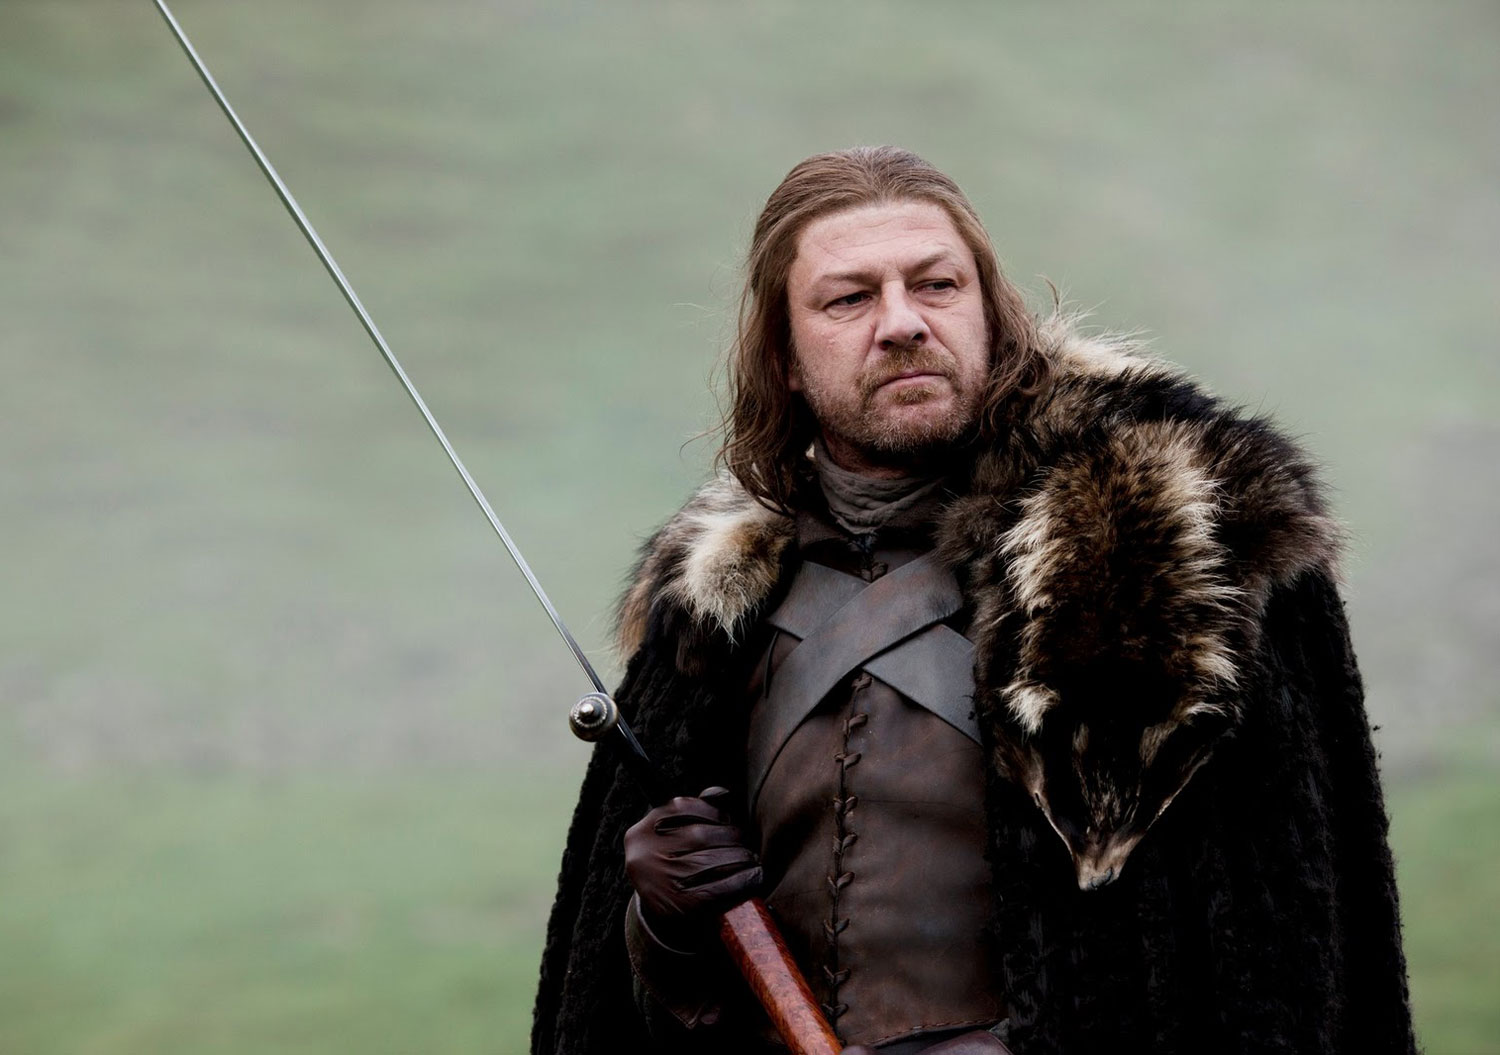 Ned Stark was beheaded in Season One after King Joffrey sentenced him to death for treason. The honorable Ned stark was one of the most well-liked and main characters at the beginning of the show. Everyone was sad to see him go and sad for his children.